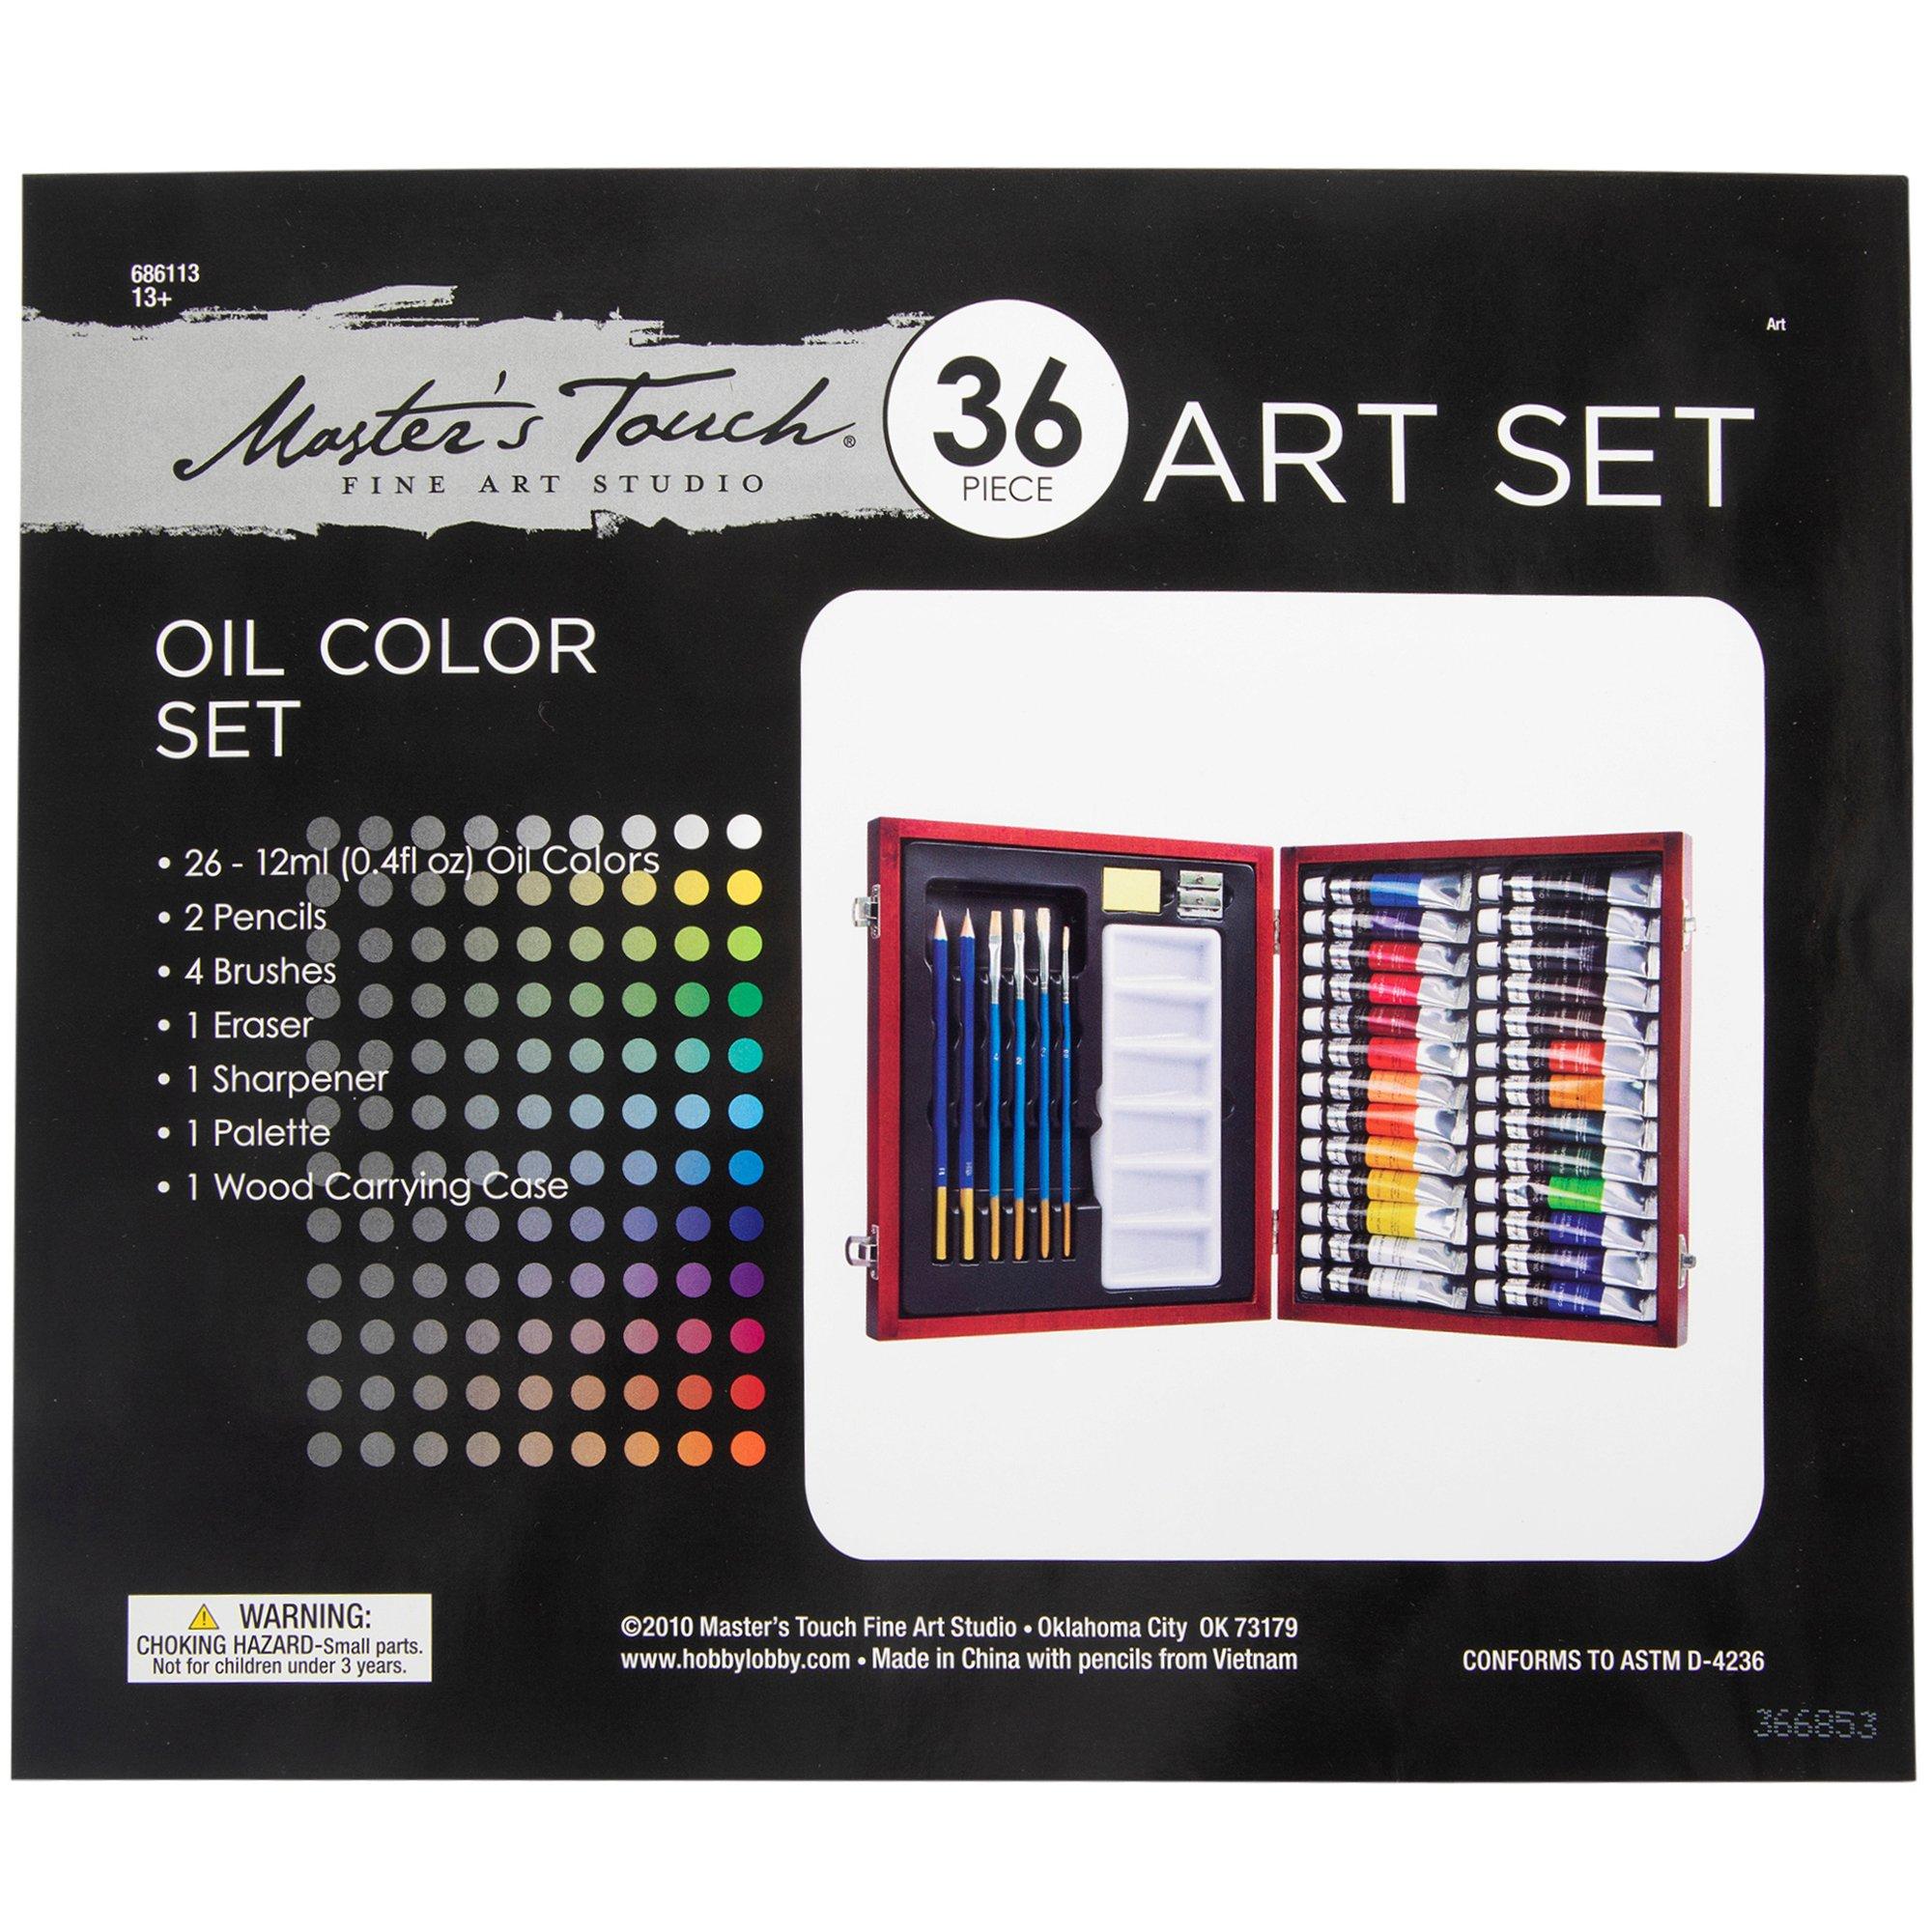 Rich Art Clean Colors Washable Paint, Hobby Lobby, 1200567